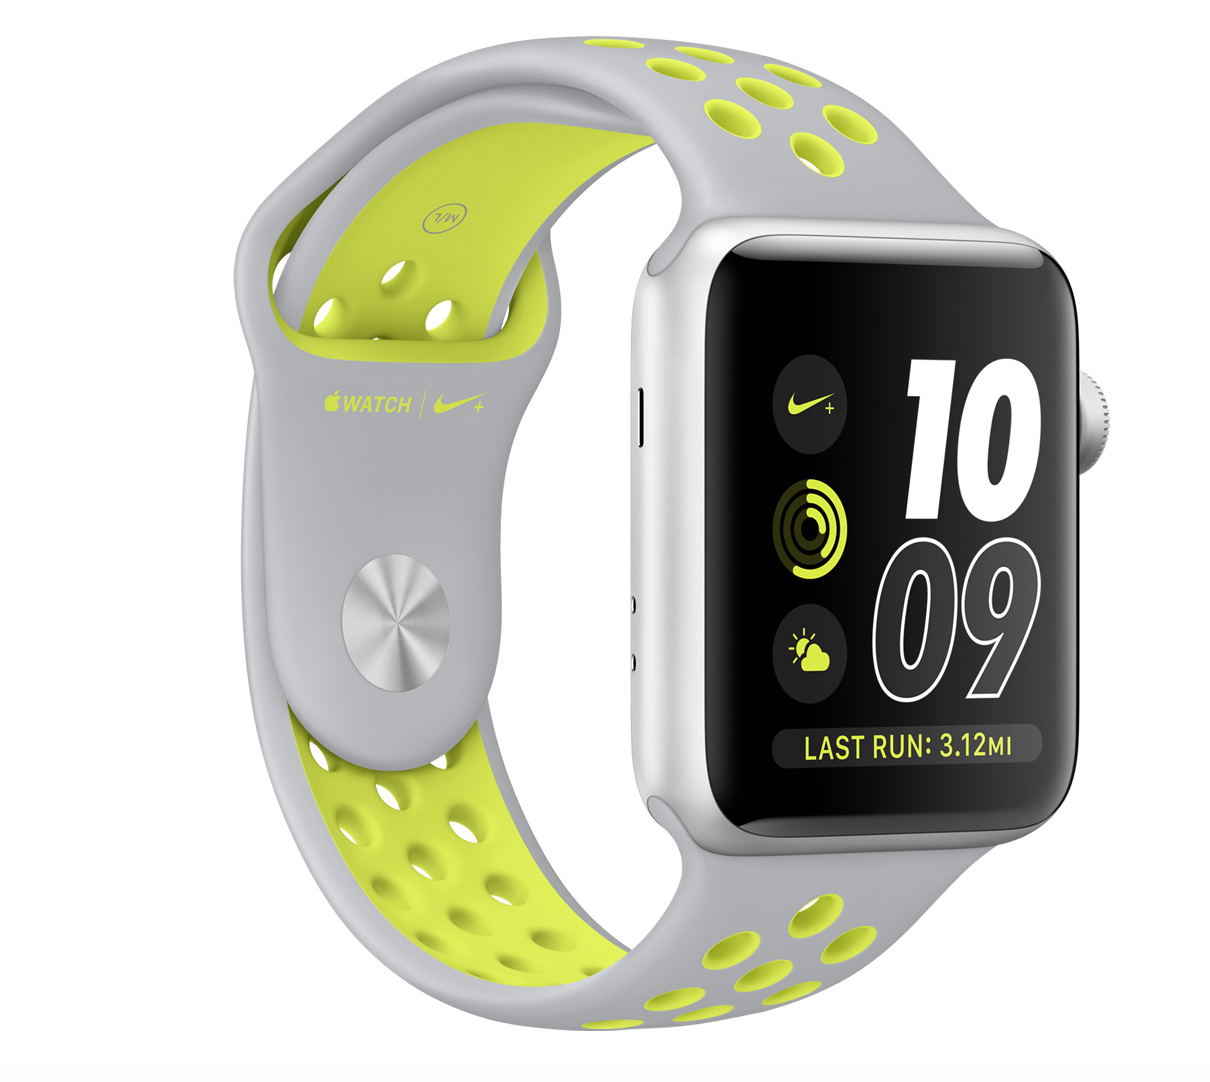 Apple Watch Nike+ Countries Announced, Bands Will Not Be Sold Separately